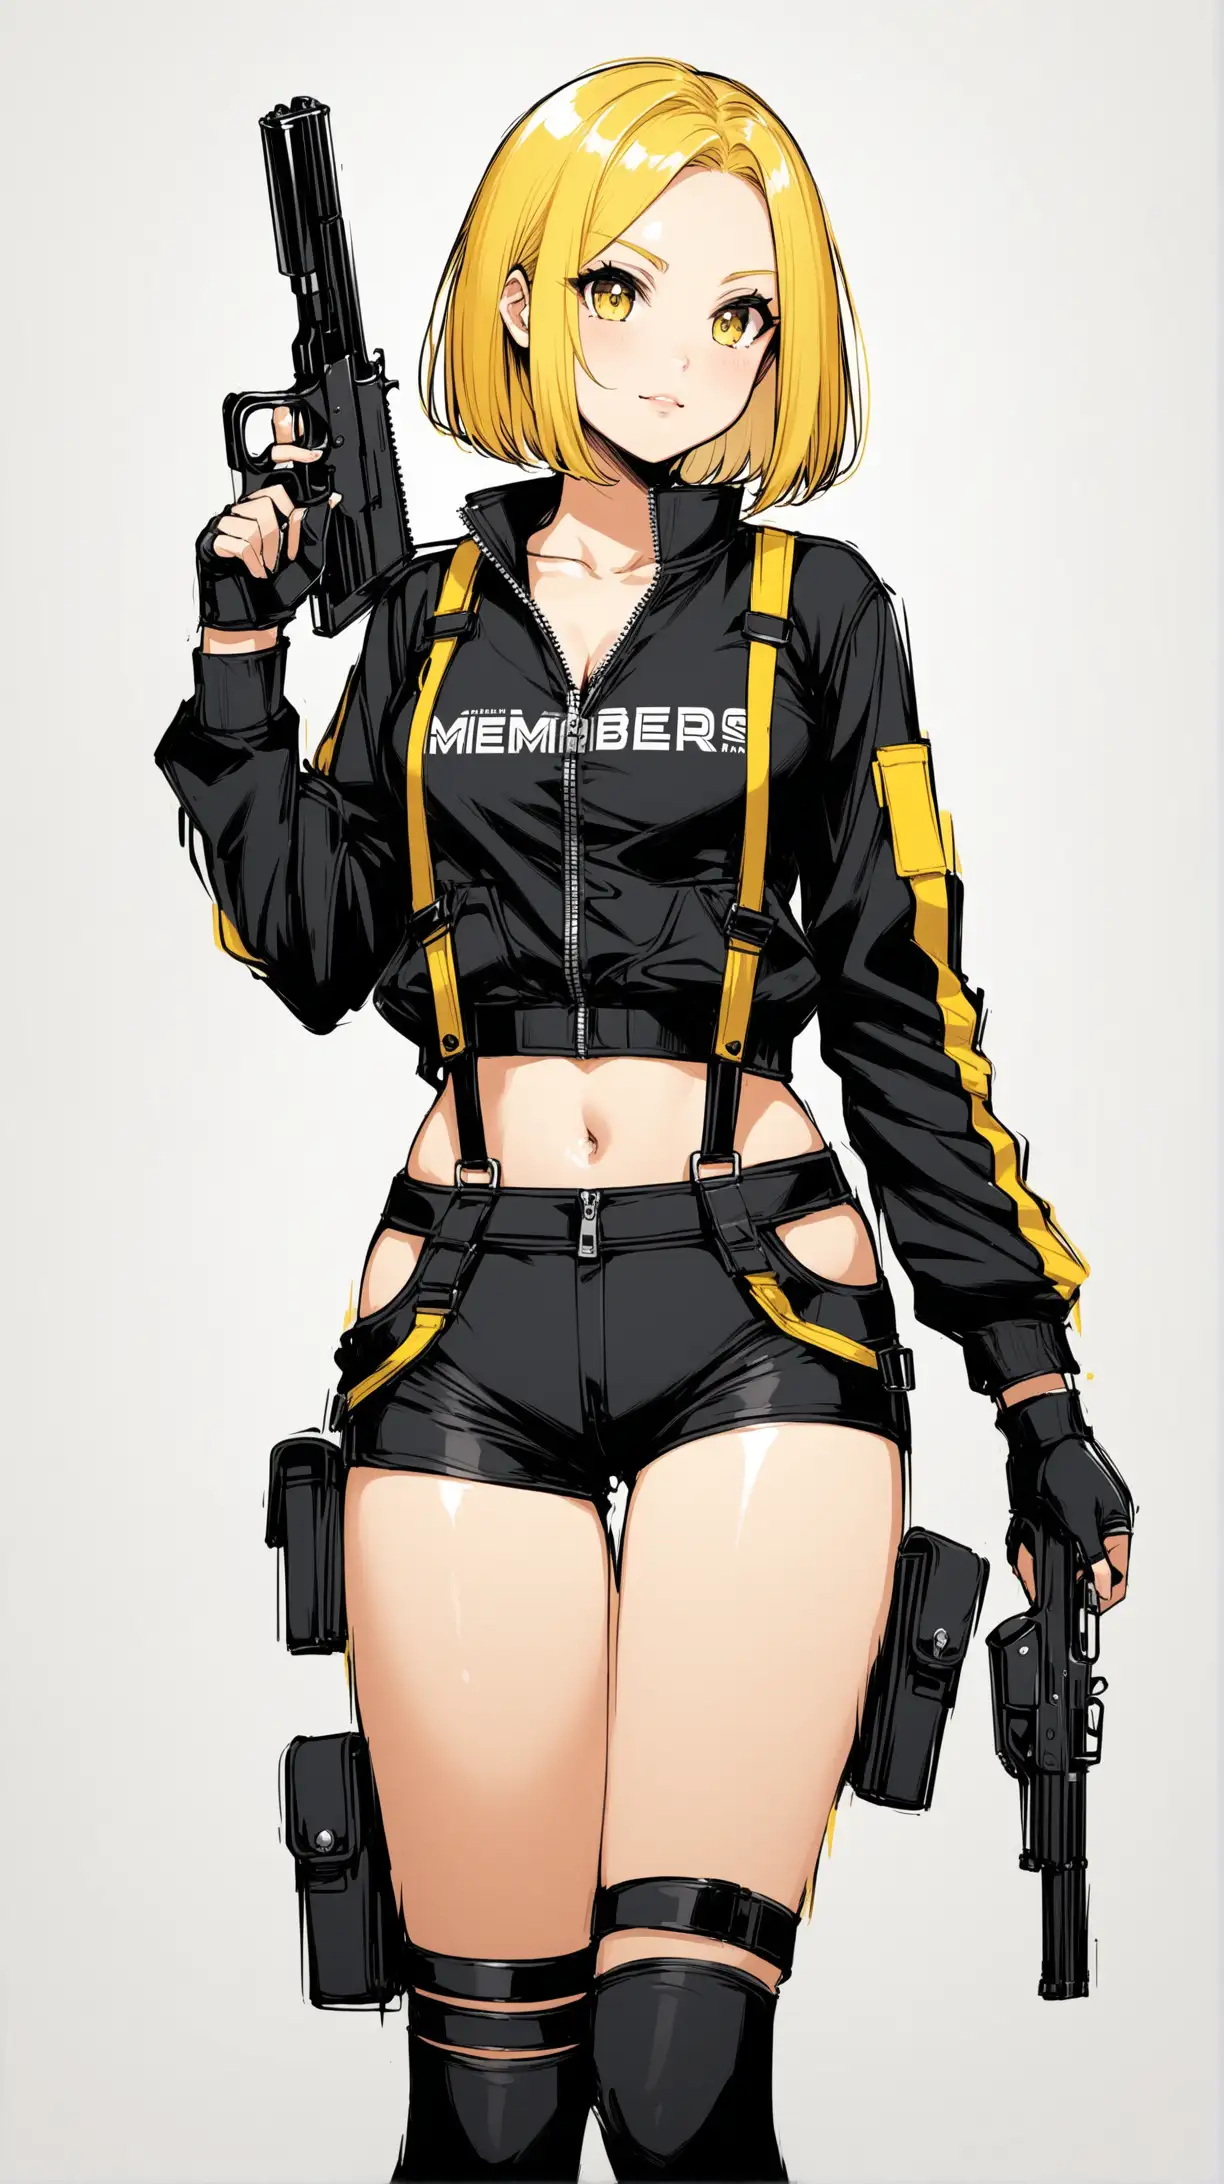 Young Heroine in Stylish Black Jacket with Guns